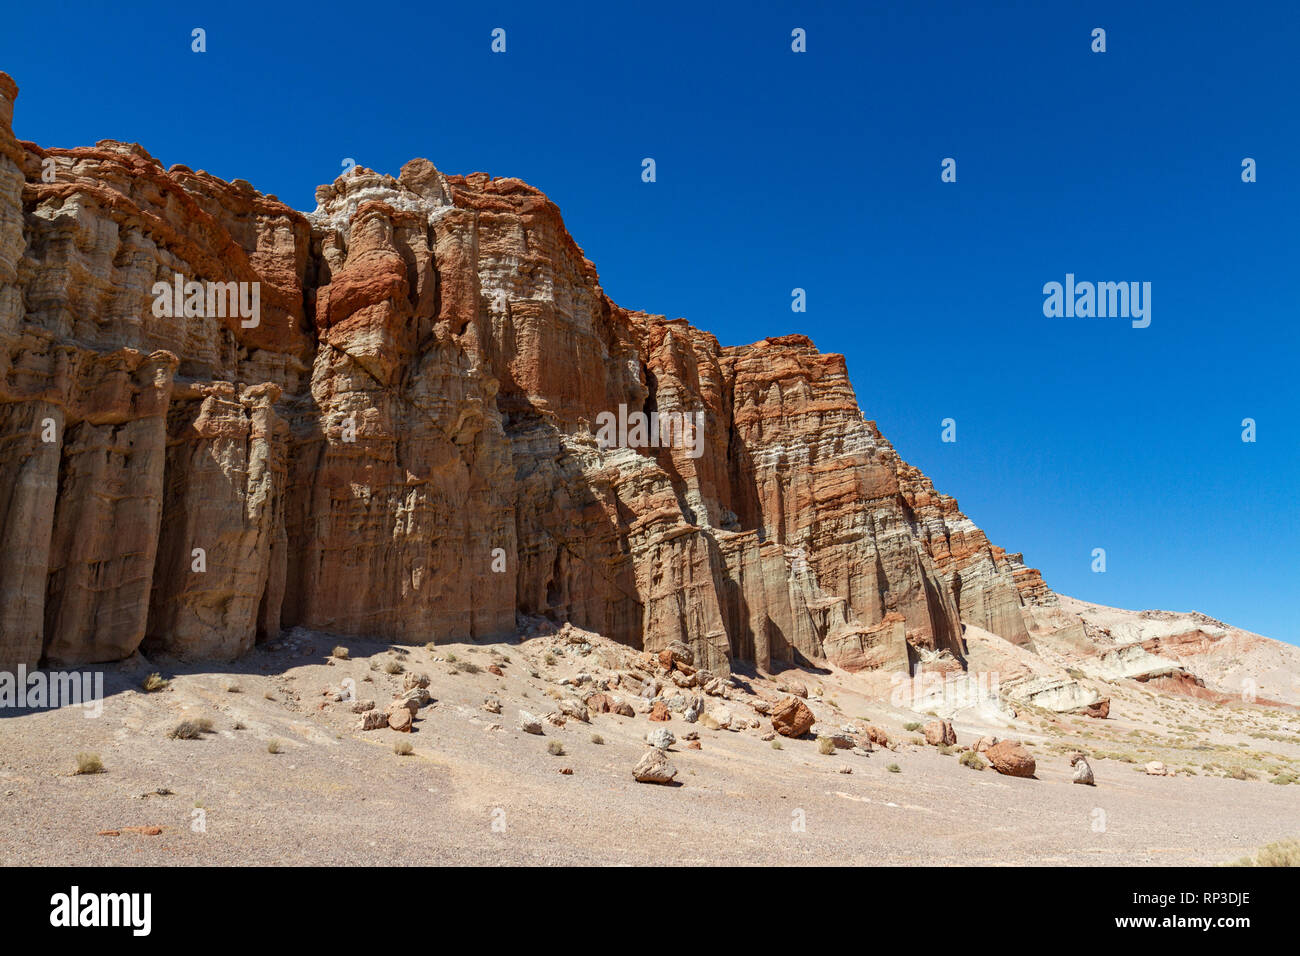 Red Rock Canyon State Park, California, United States. Stockfoto